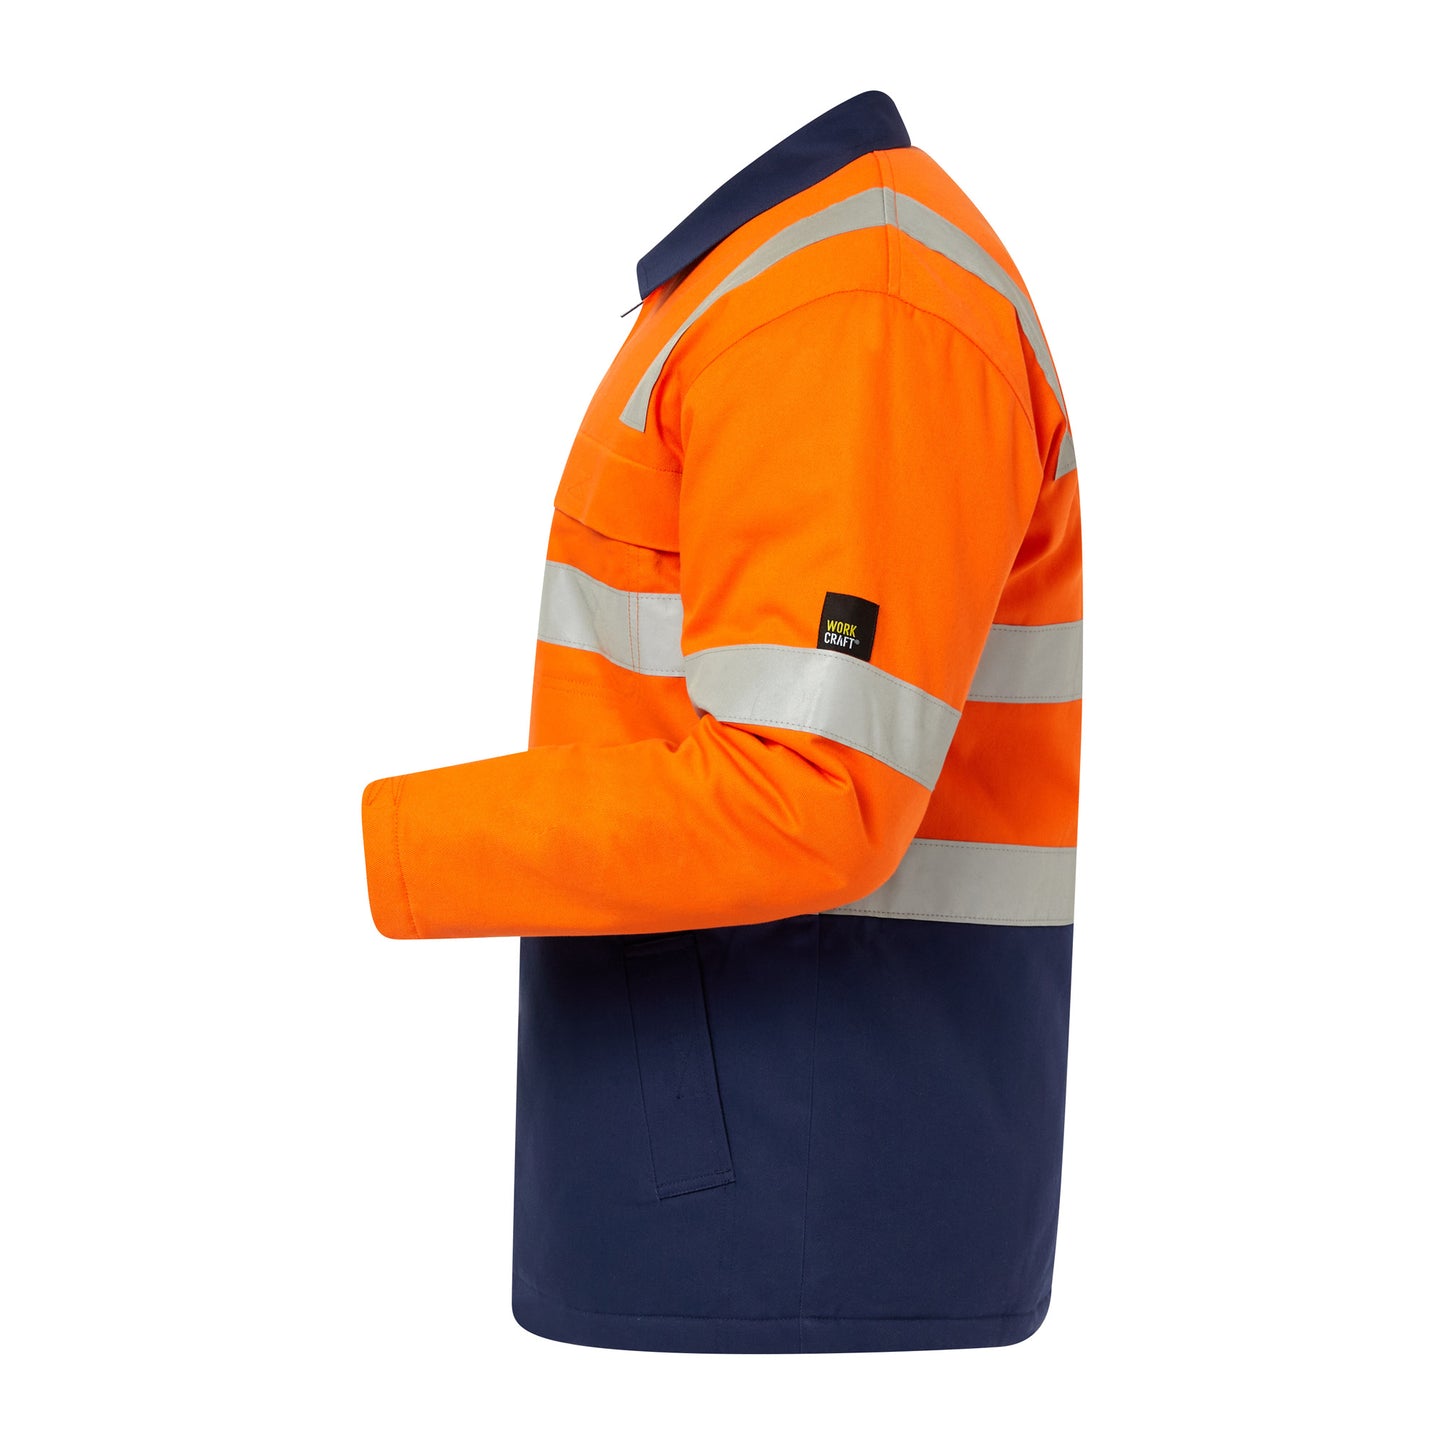 Hi Vis Quilted Jacket With Reflective Tape - made by Workcraft